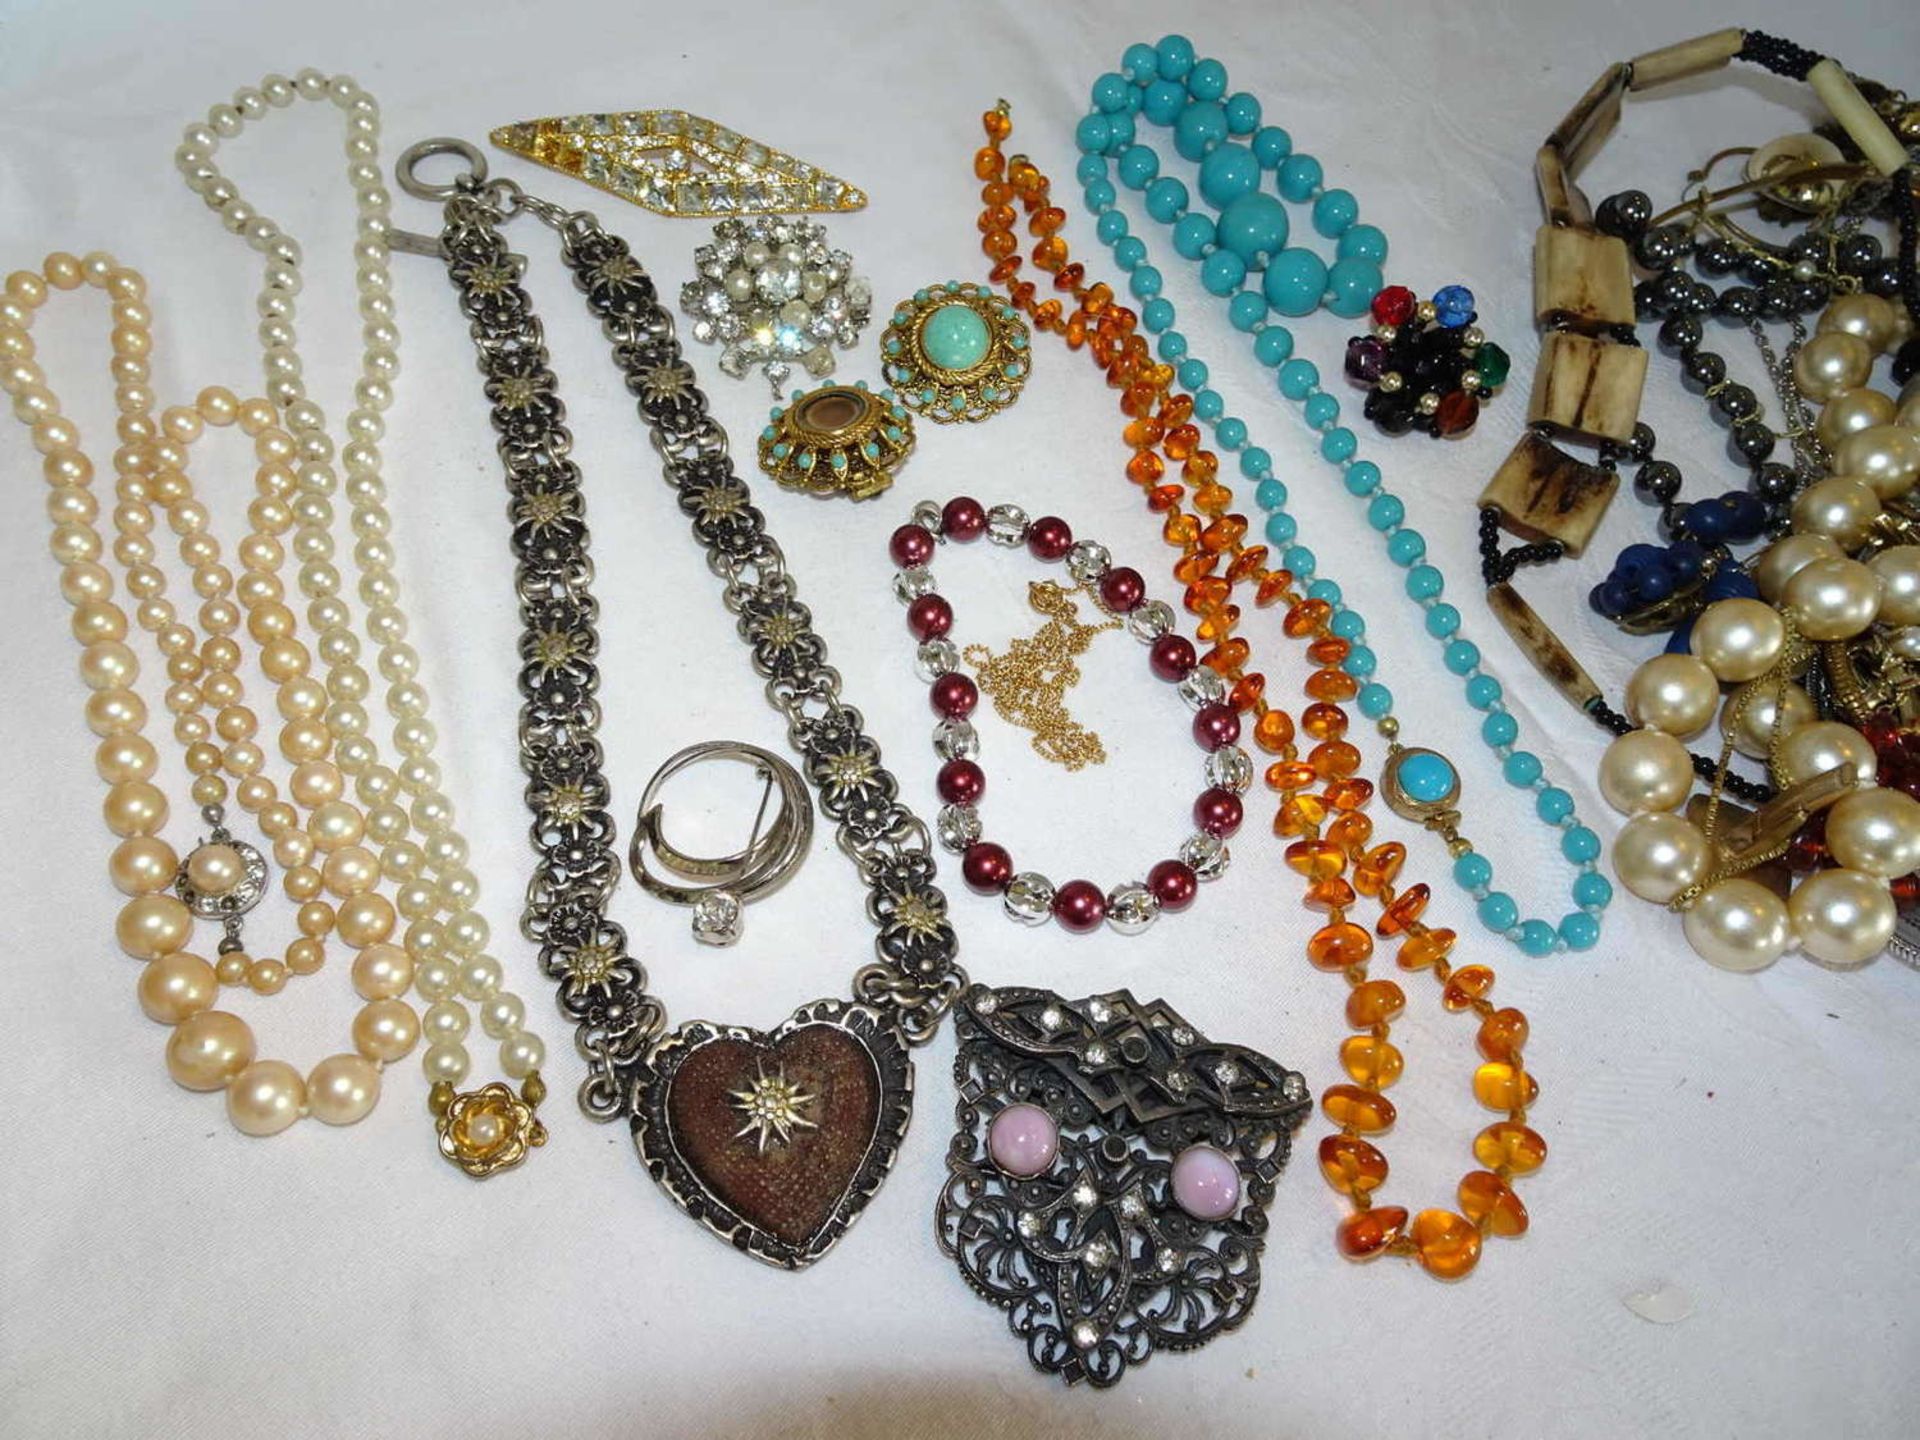 Large lot of costume jewelry, please have a look!